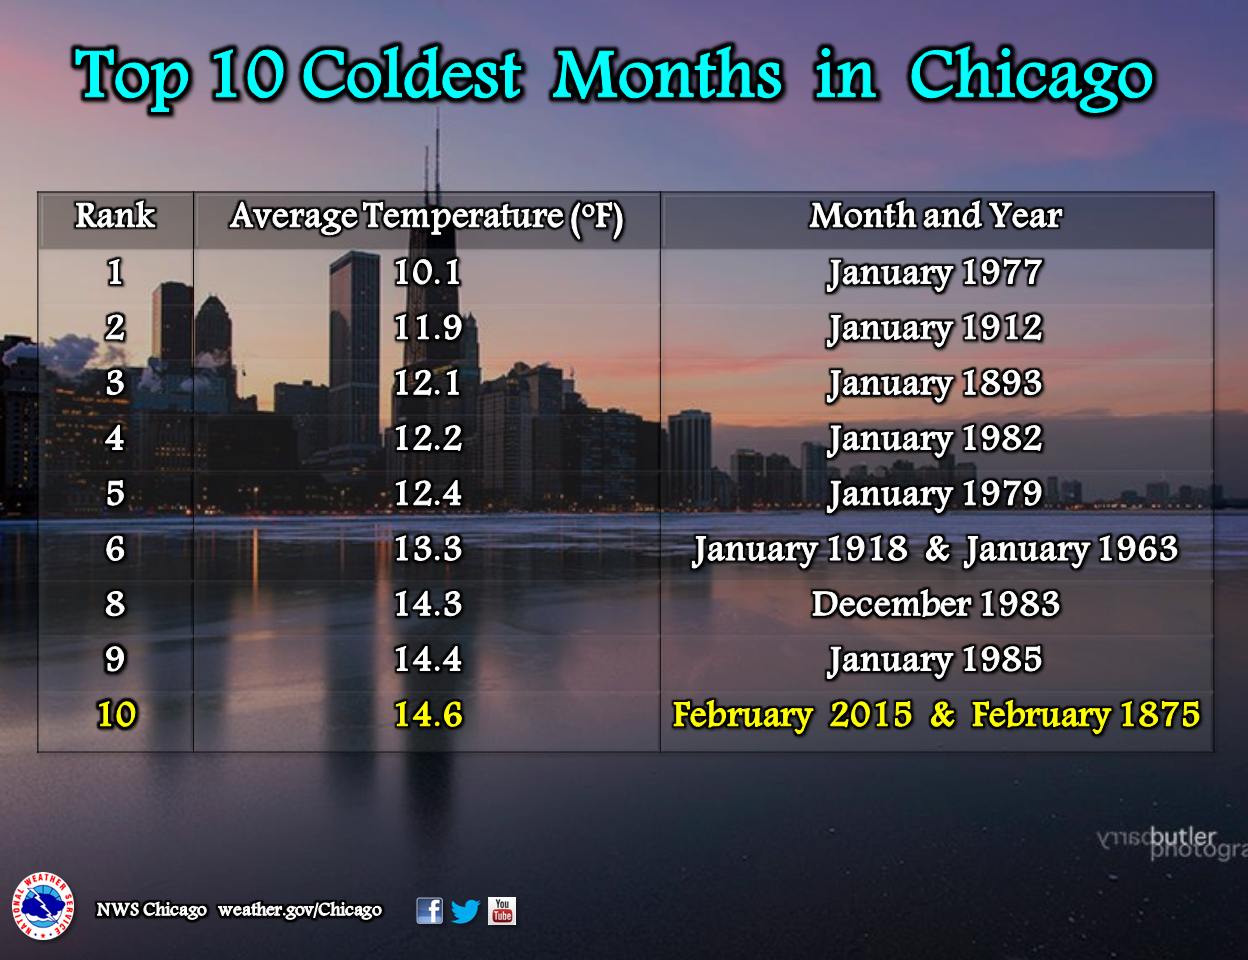 Top 10 Coldest Months in Chicago